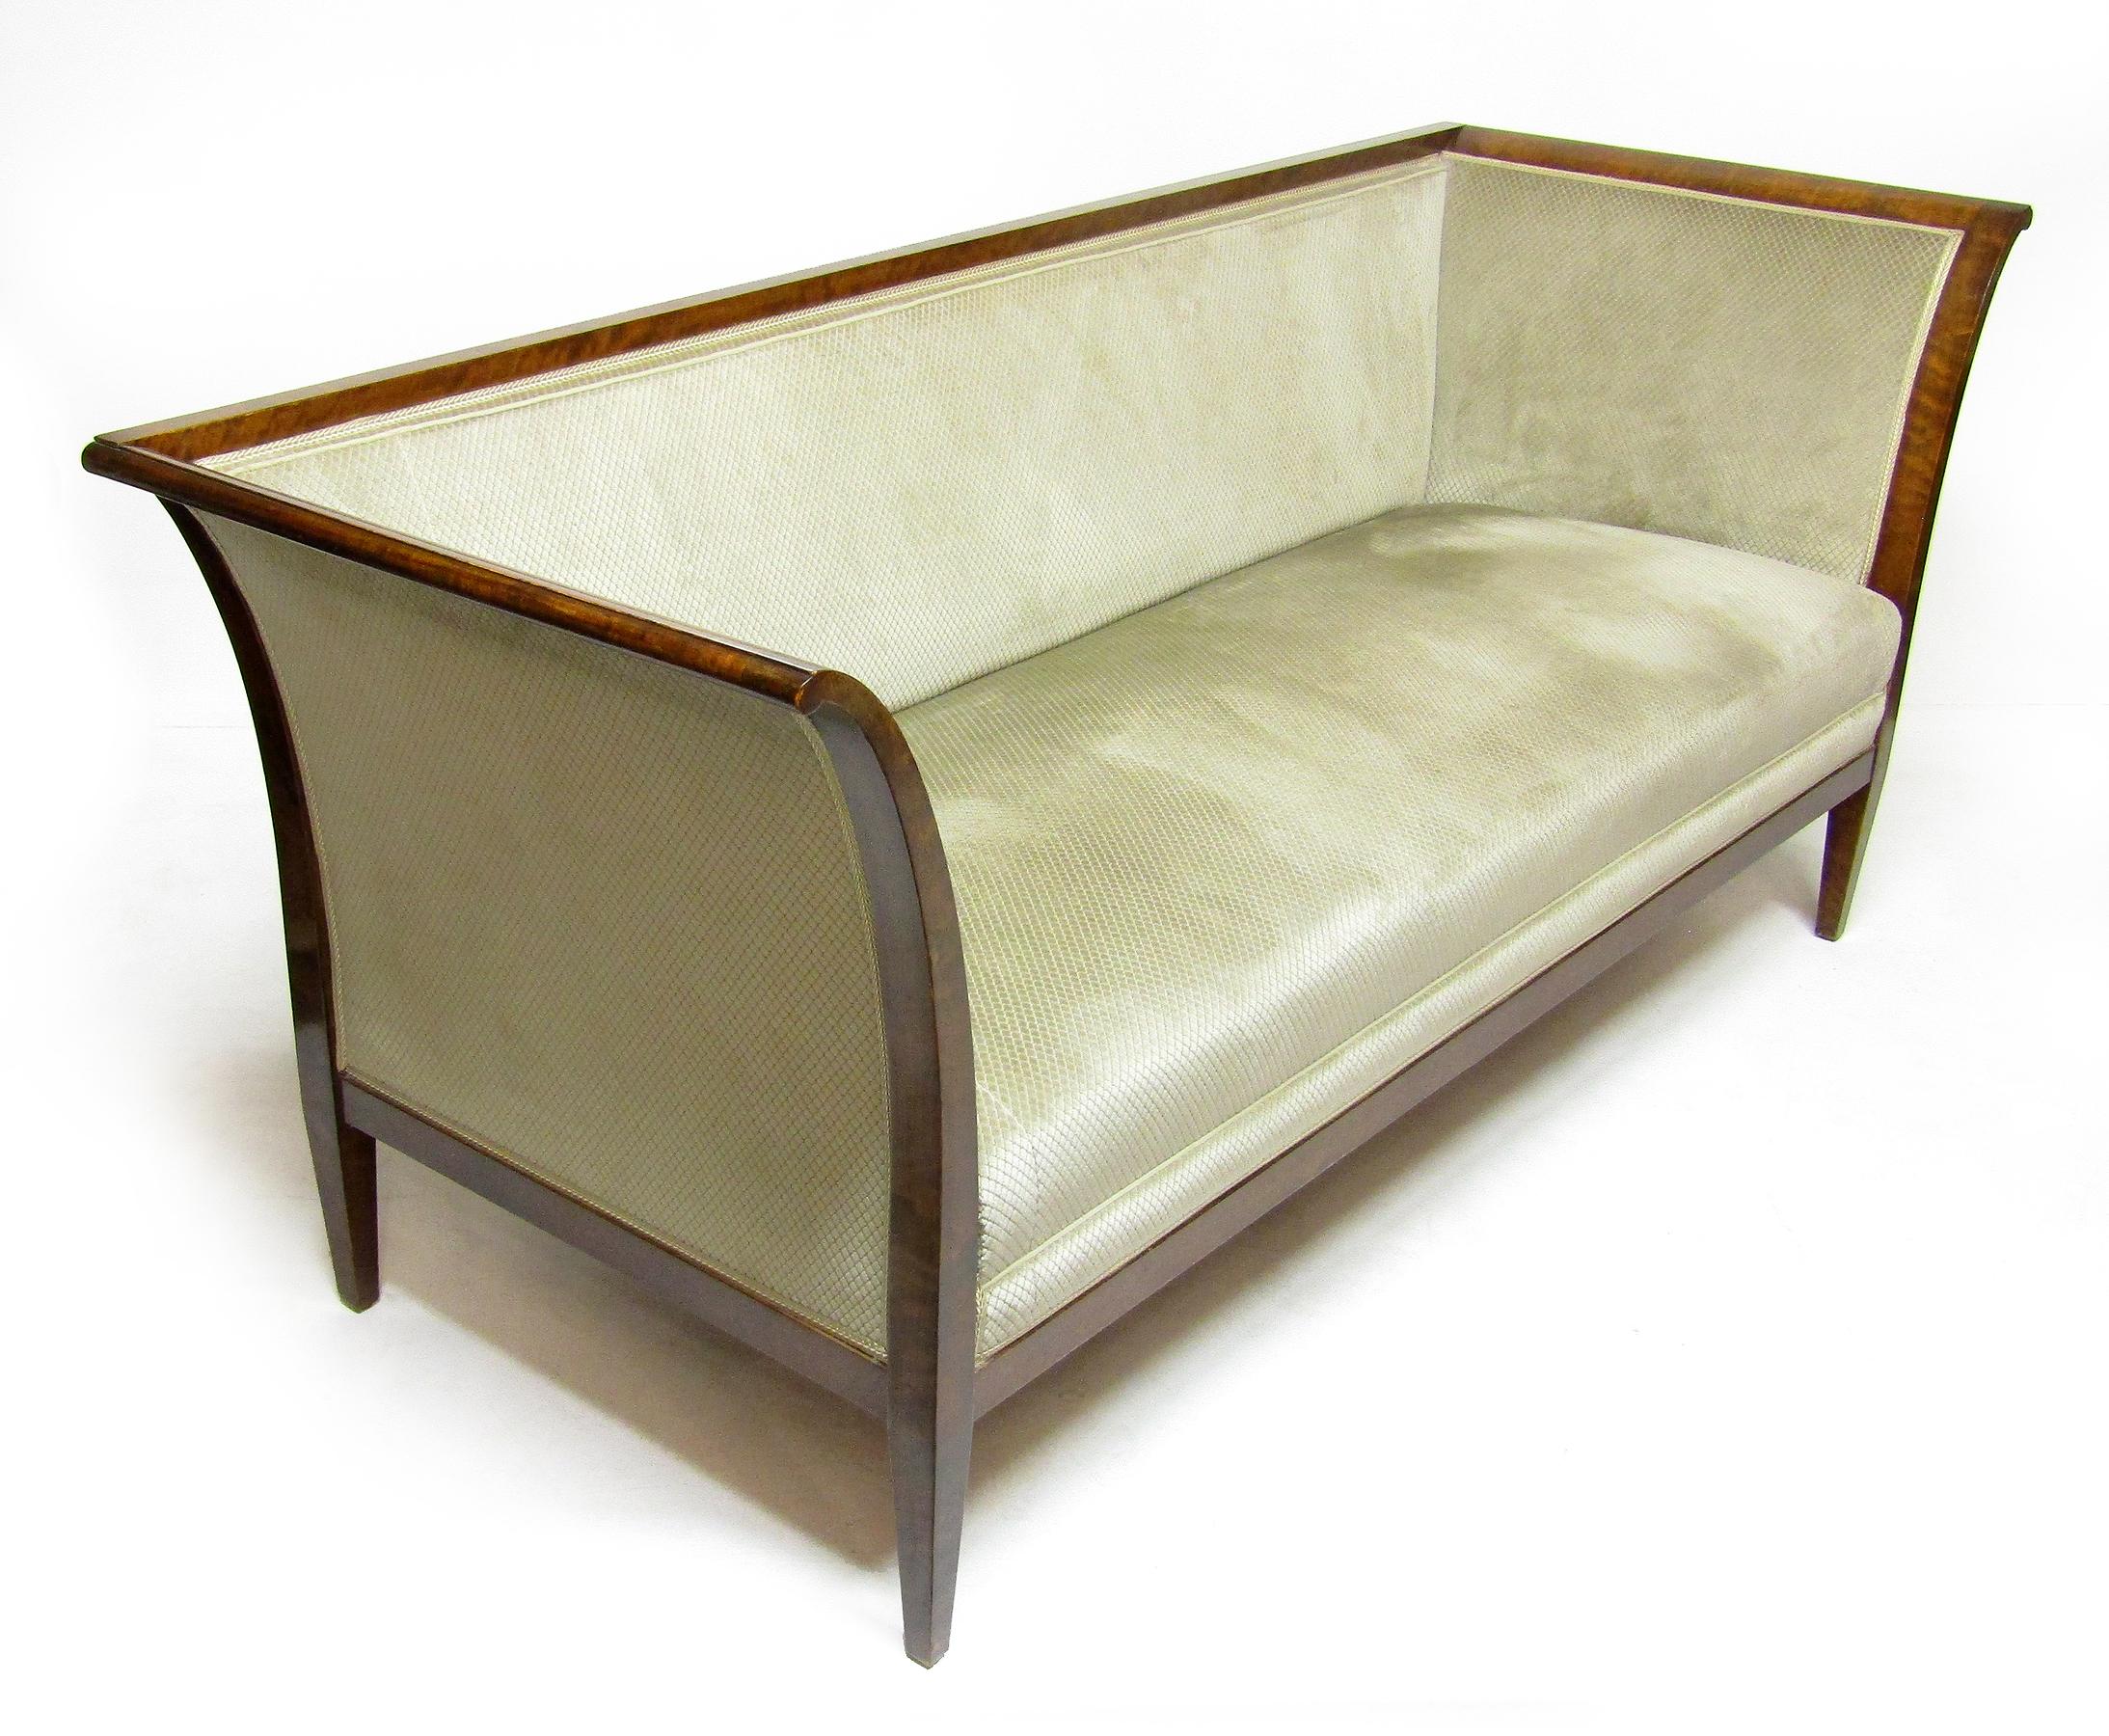 1930s Danish Art Deco 3-Seater Sofa In Cuban Mahogany By Frits Henningsen For Sale 3